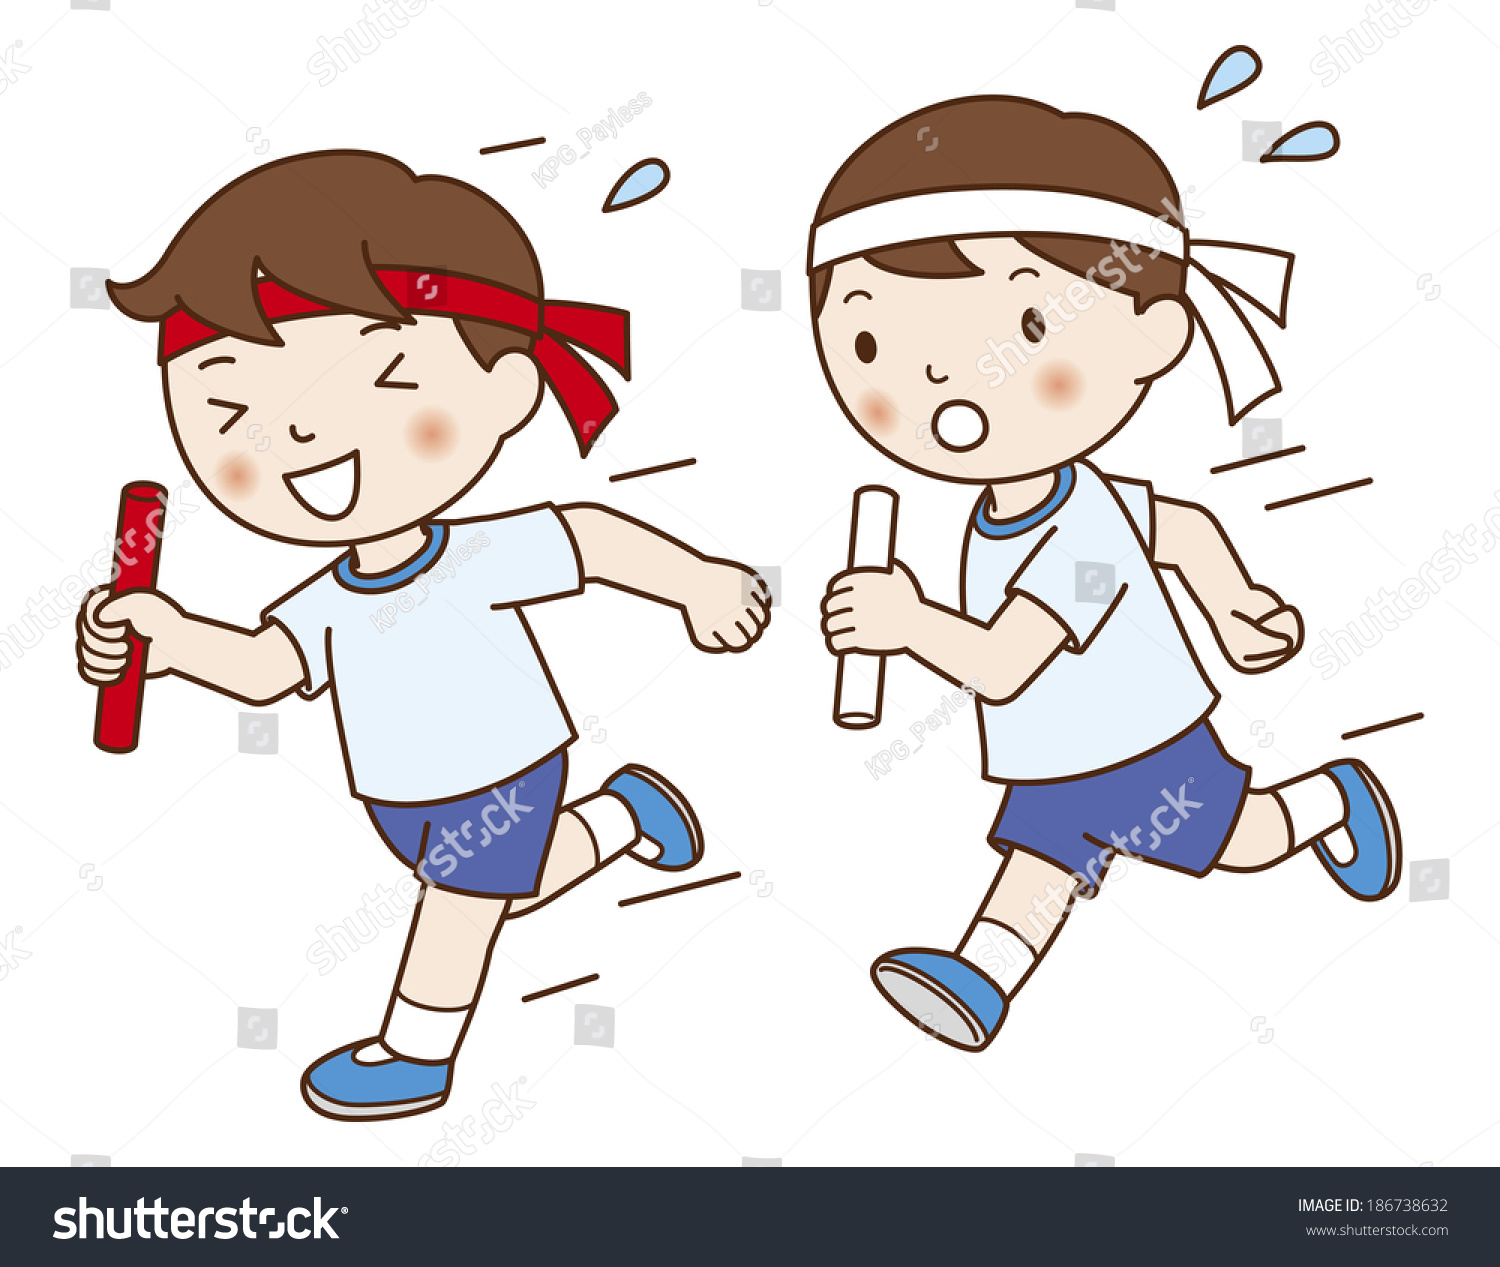 clipart for sports day - photo #14